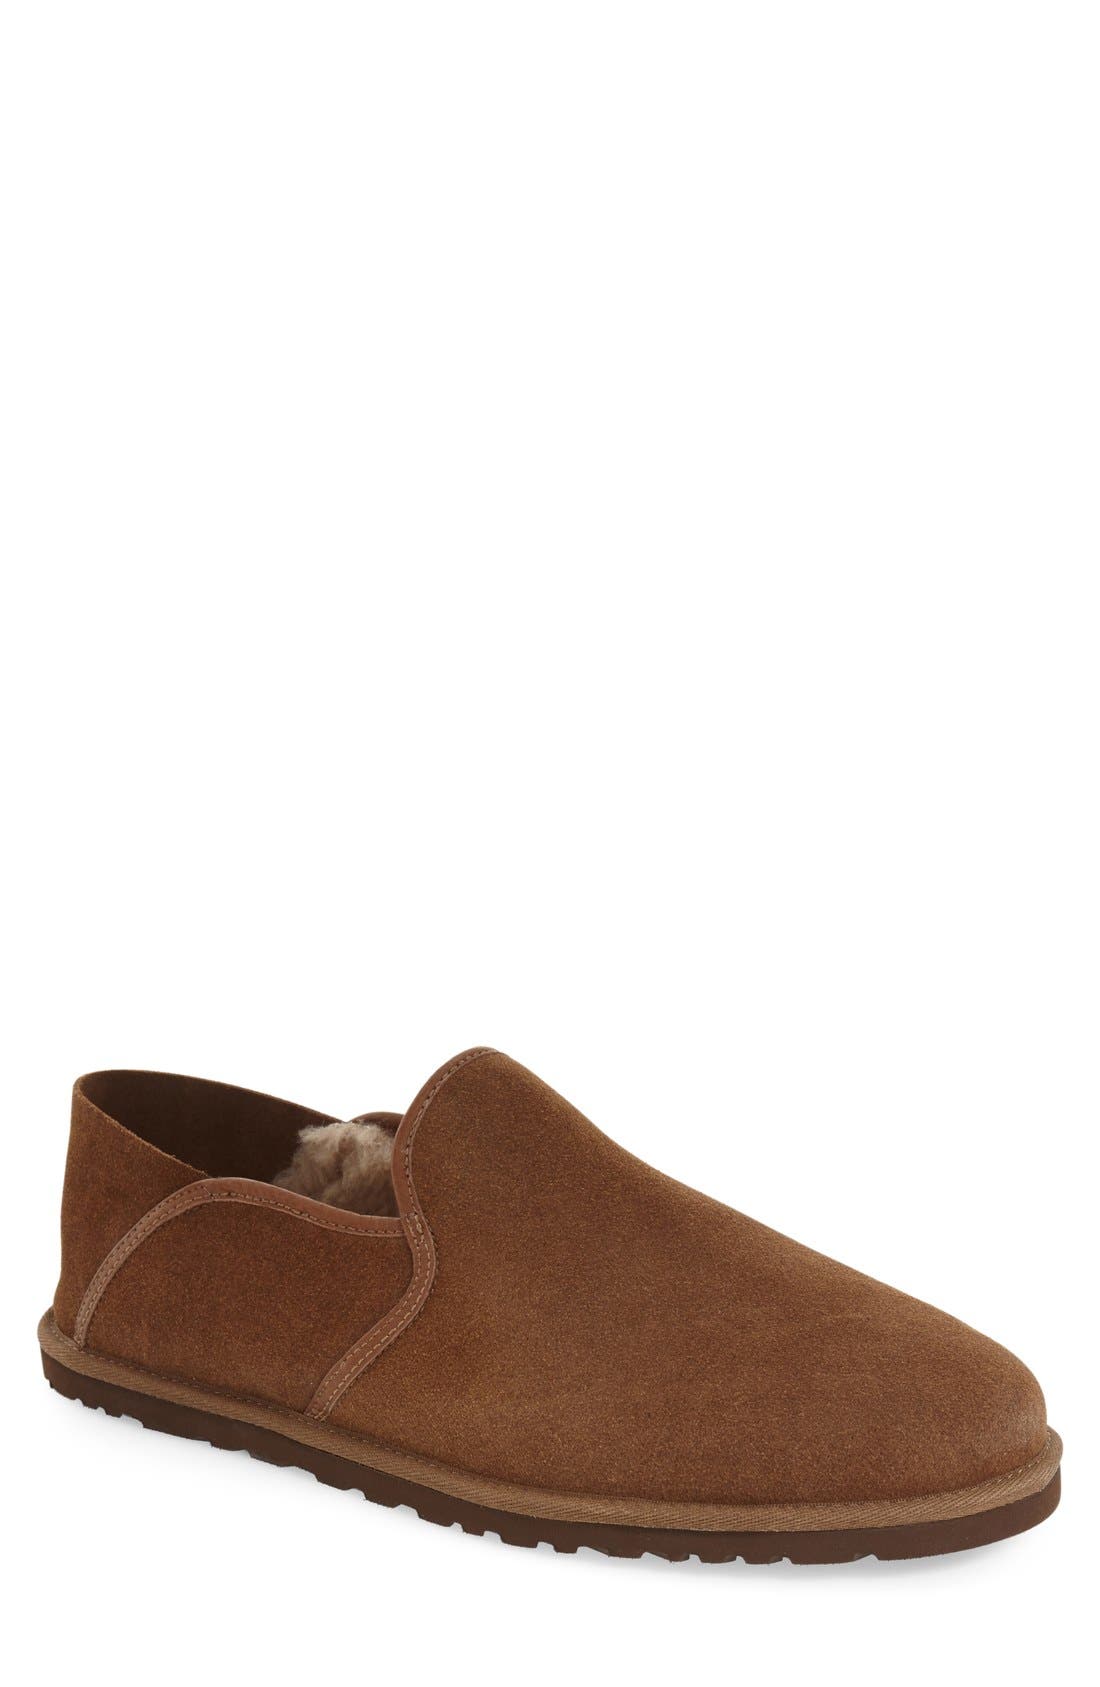 shearling lined slippers mens